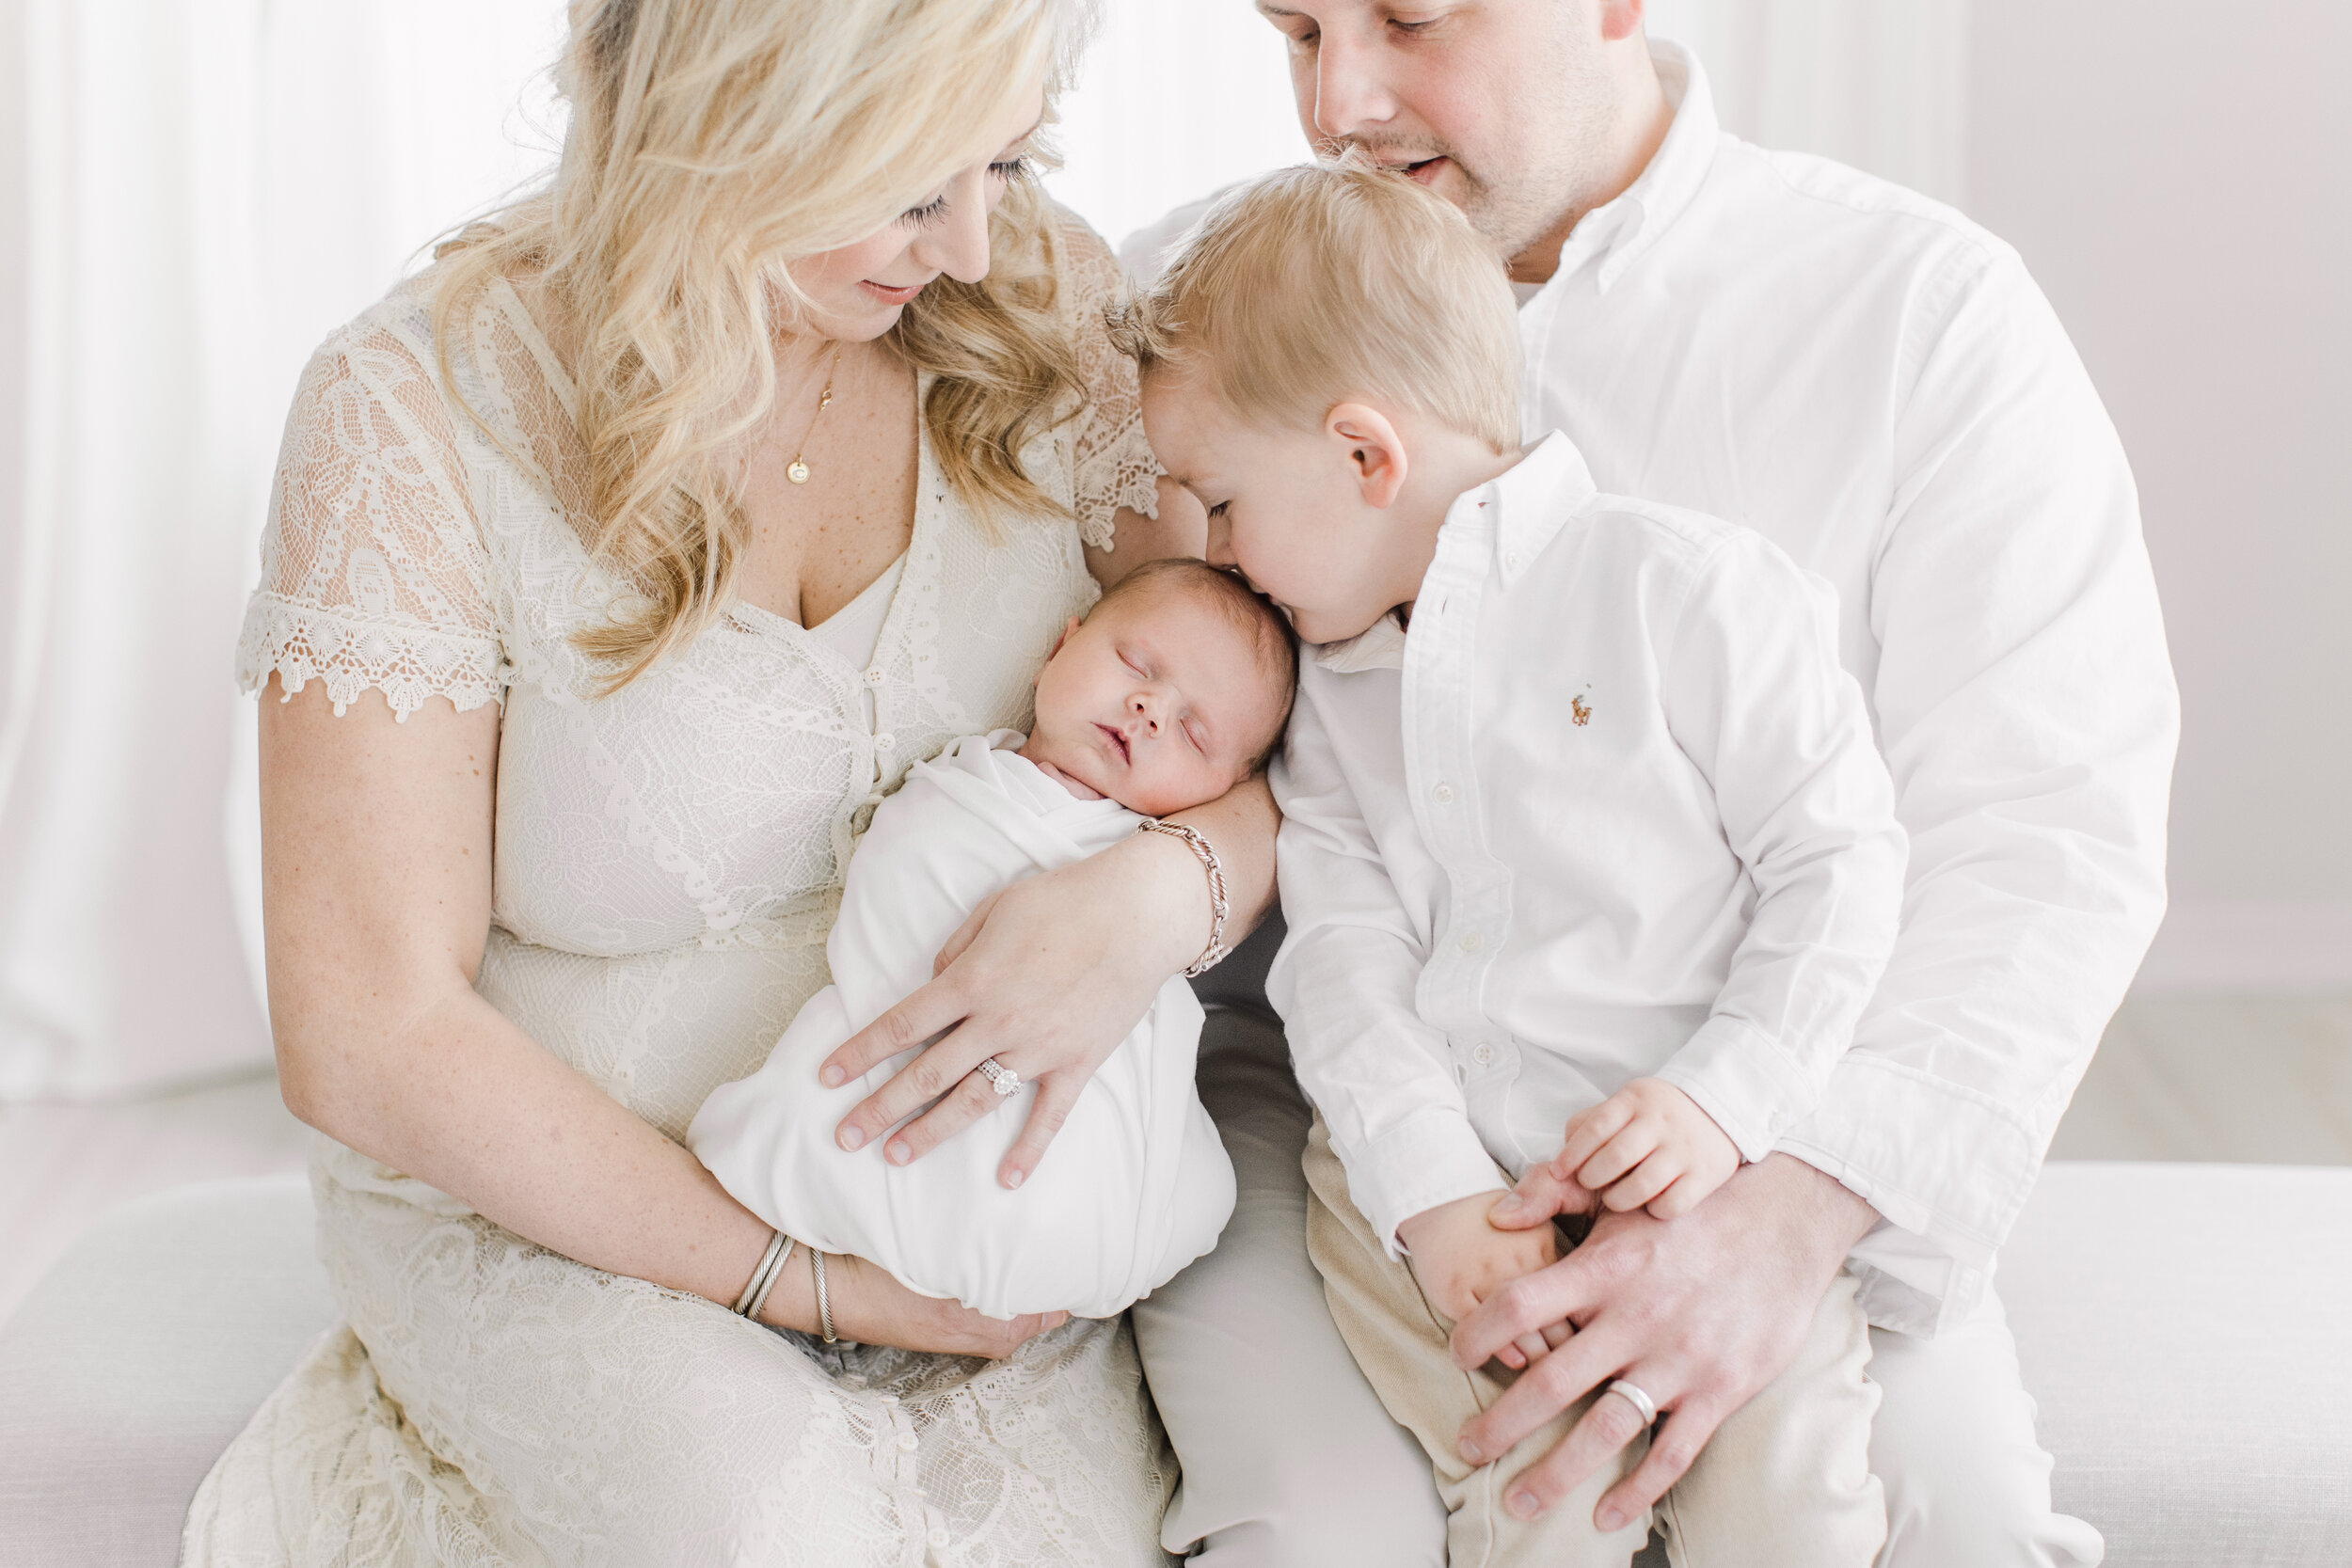 brother kissing baby during newborn photo shoot